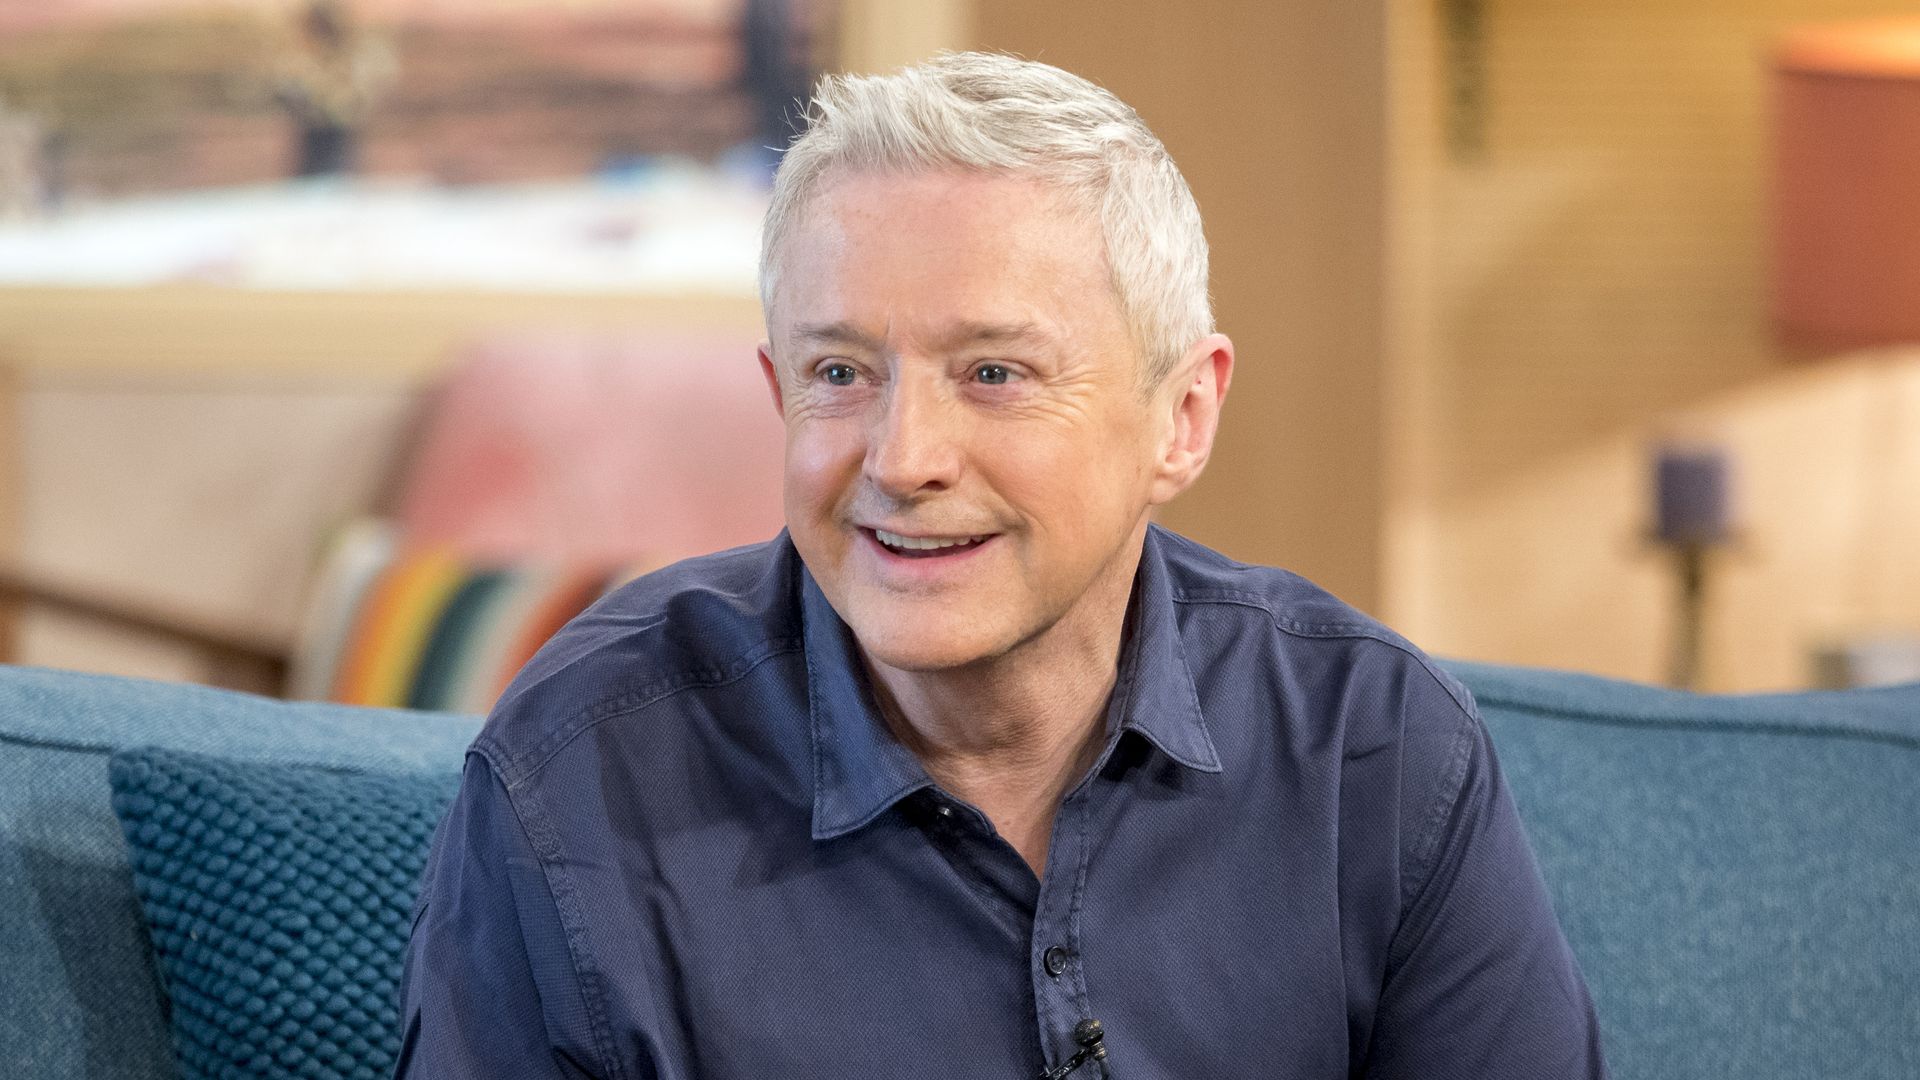 Inside Louis Walsh's private life away from cameras: From love life to fallout with Ronan Keating